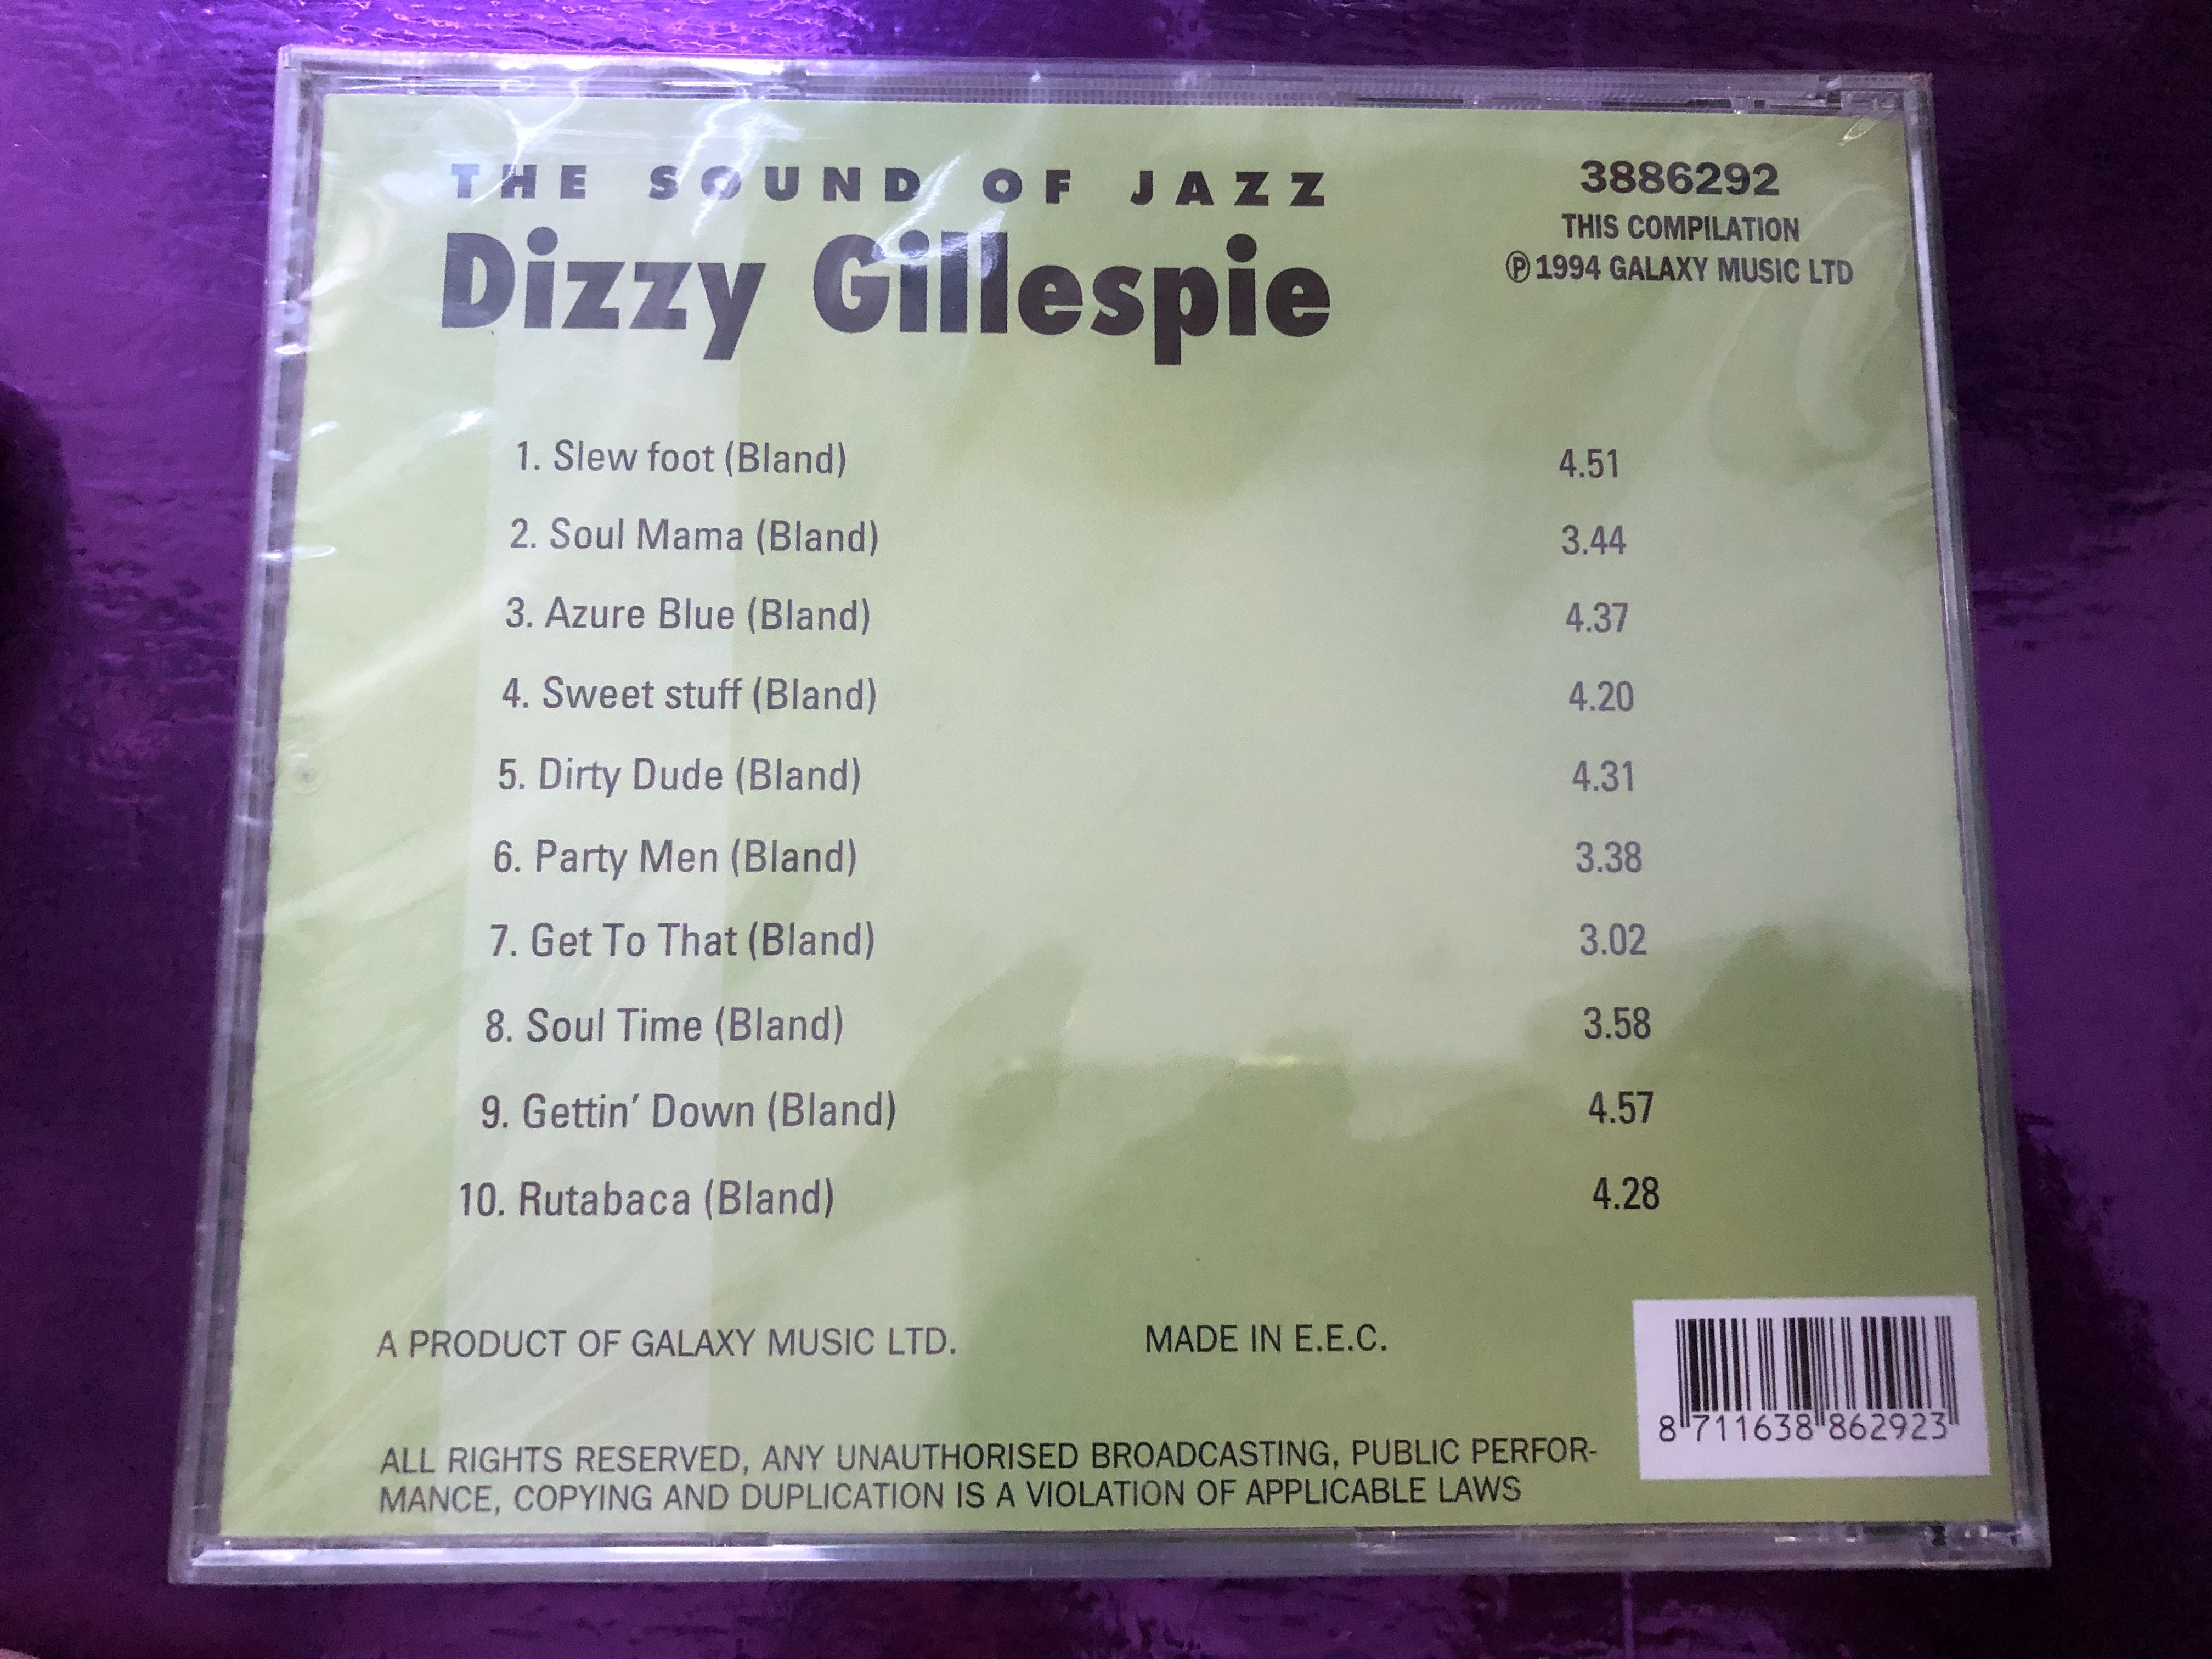 sound-of-jazz-dizzie-gillespie-vol.-29-slew-foot-soul-mama-azure-blue-sweet-stuff-dirty-dude-party-men-get-to-that-soul-time-gettin-down-rutabaca-galaxy-music-audio-cd-1994-38.jpg